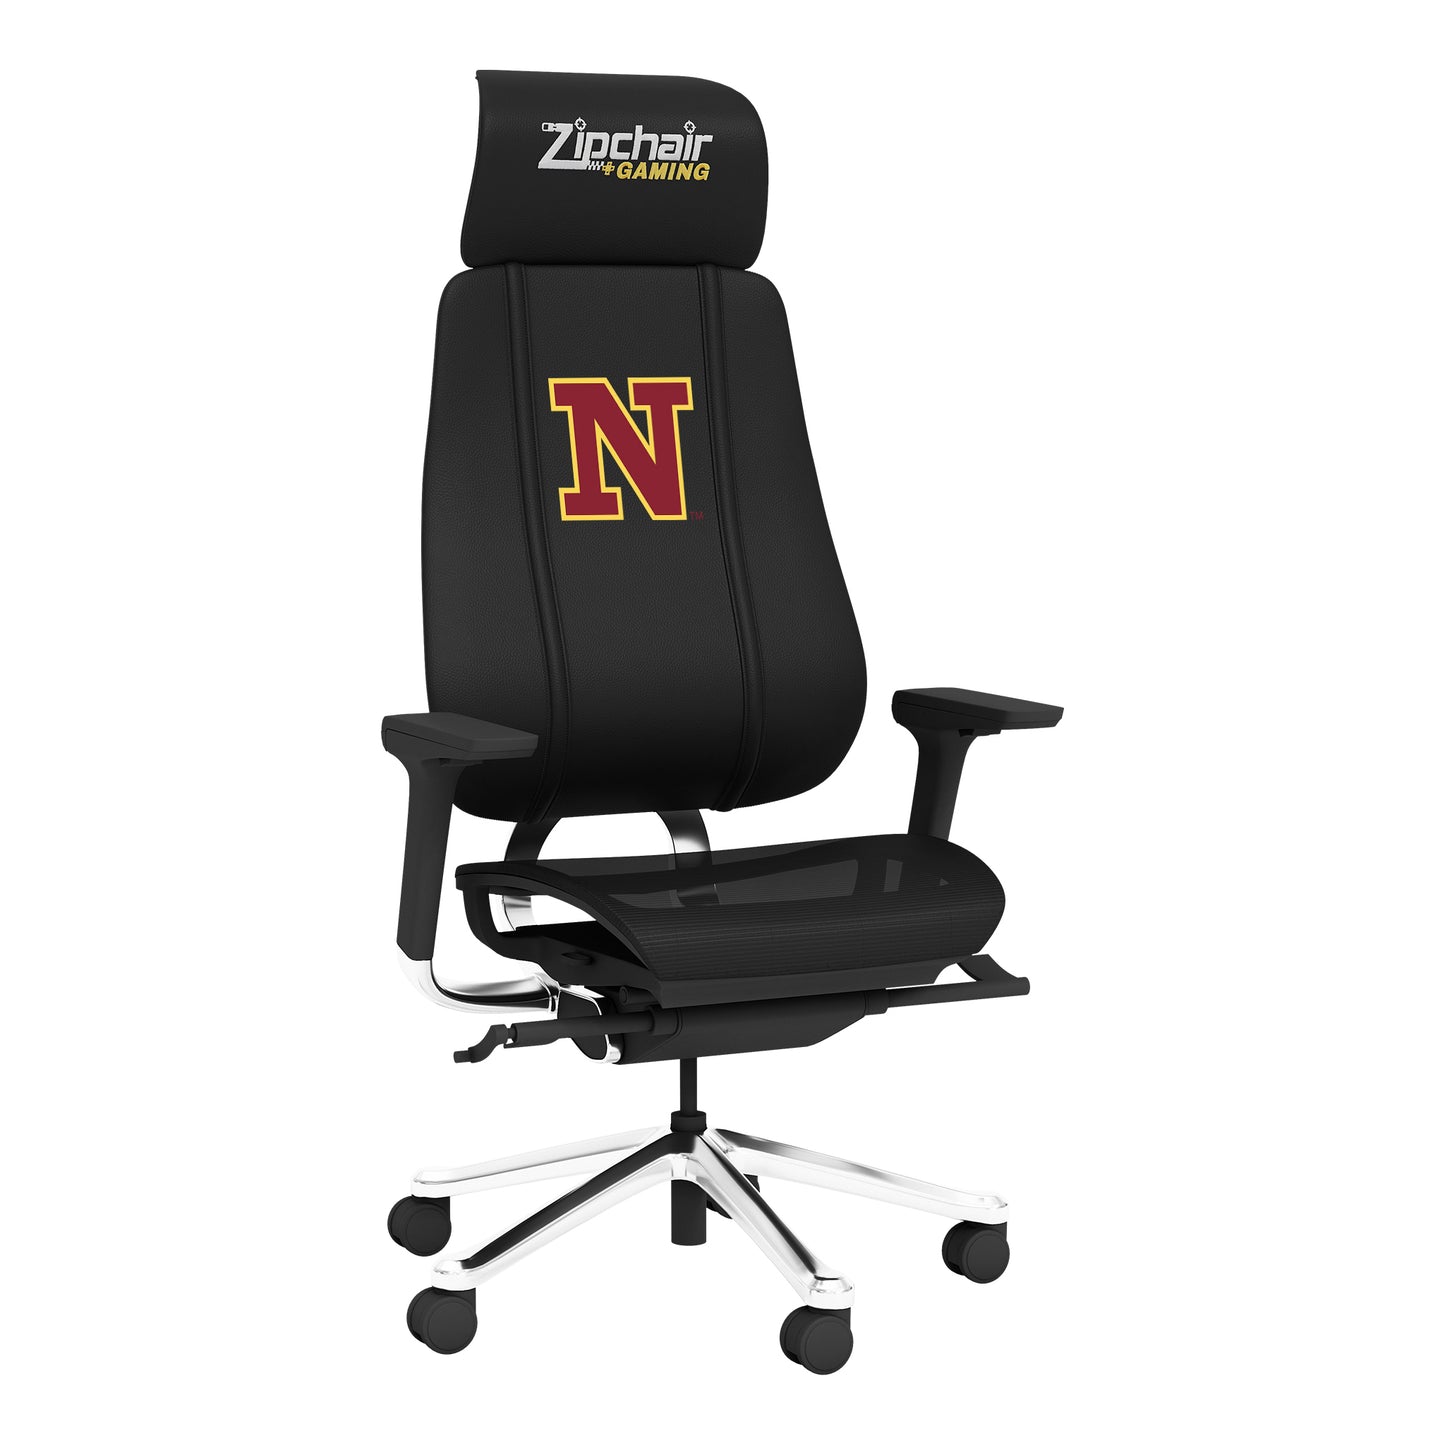 PhantomX Gaming Chair with Northern State N Logo